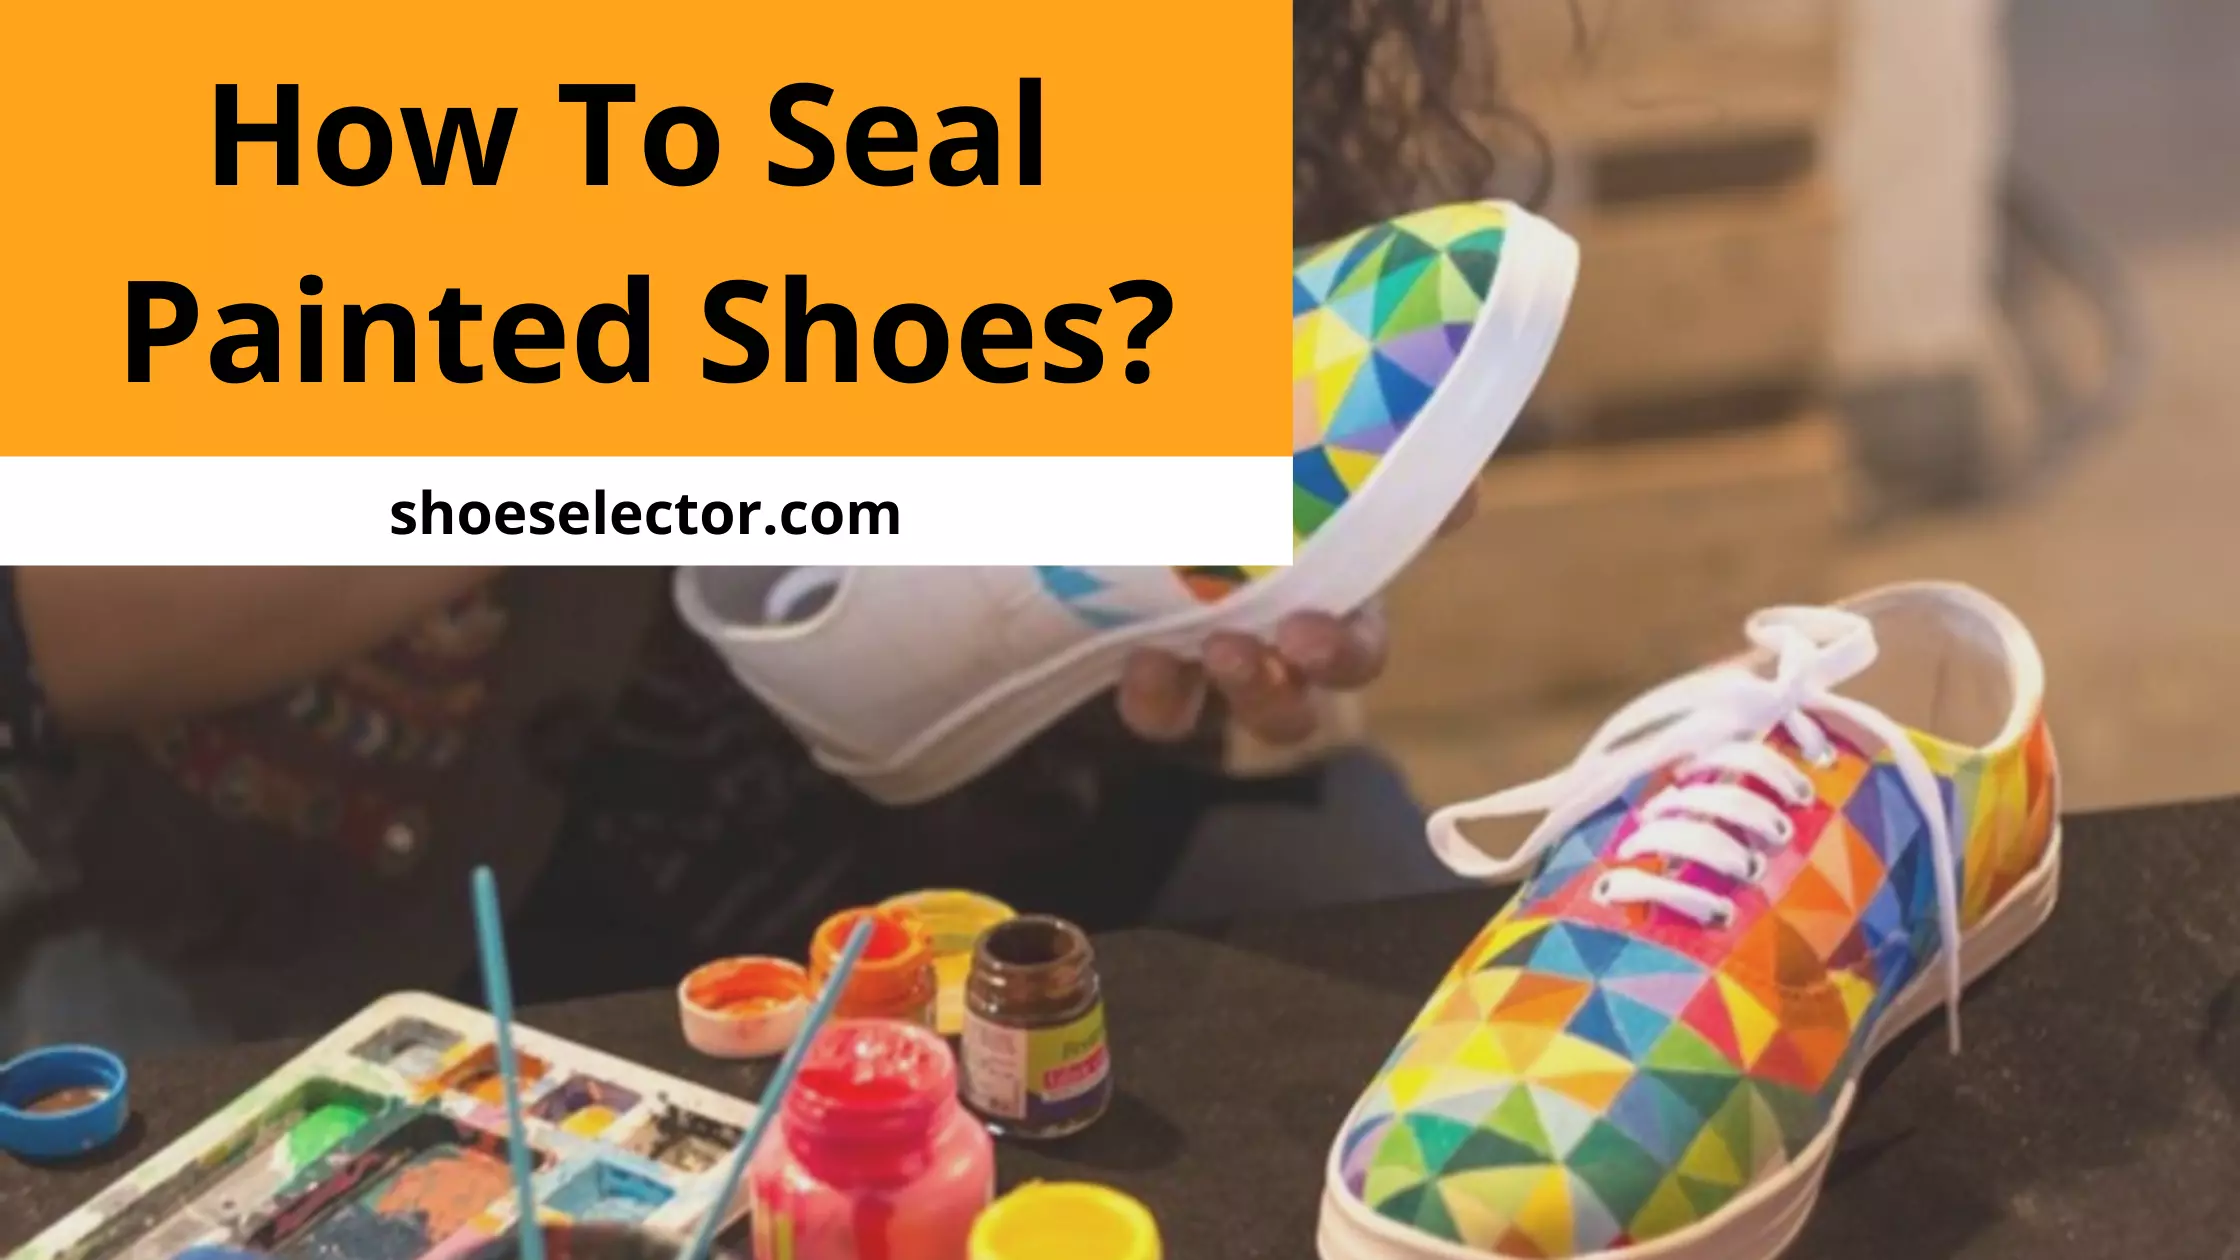 How To Seal Painted Shoes - Complete Guide